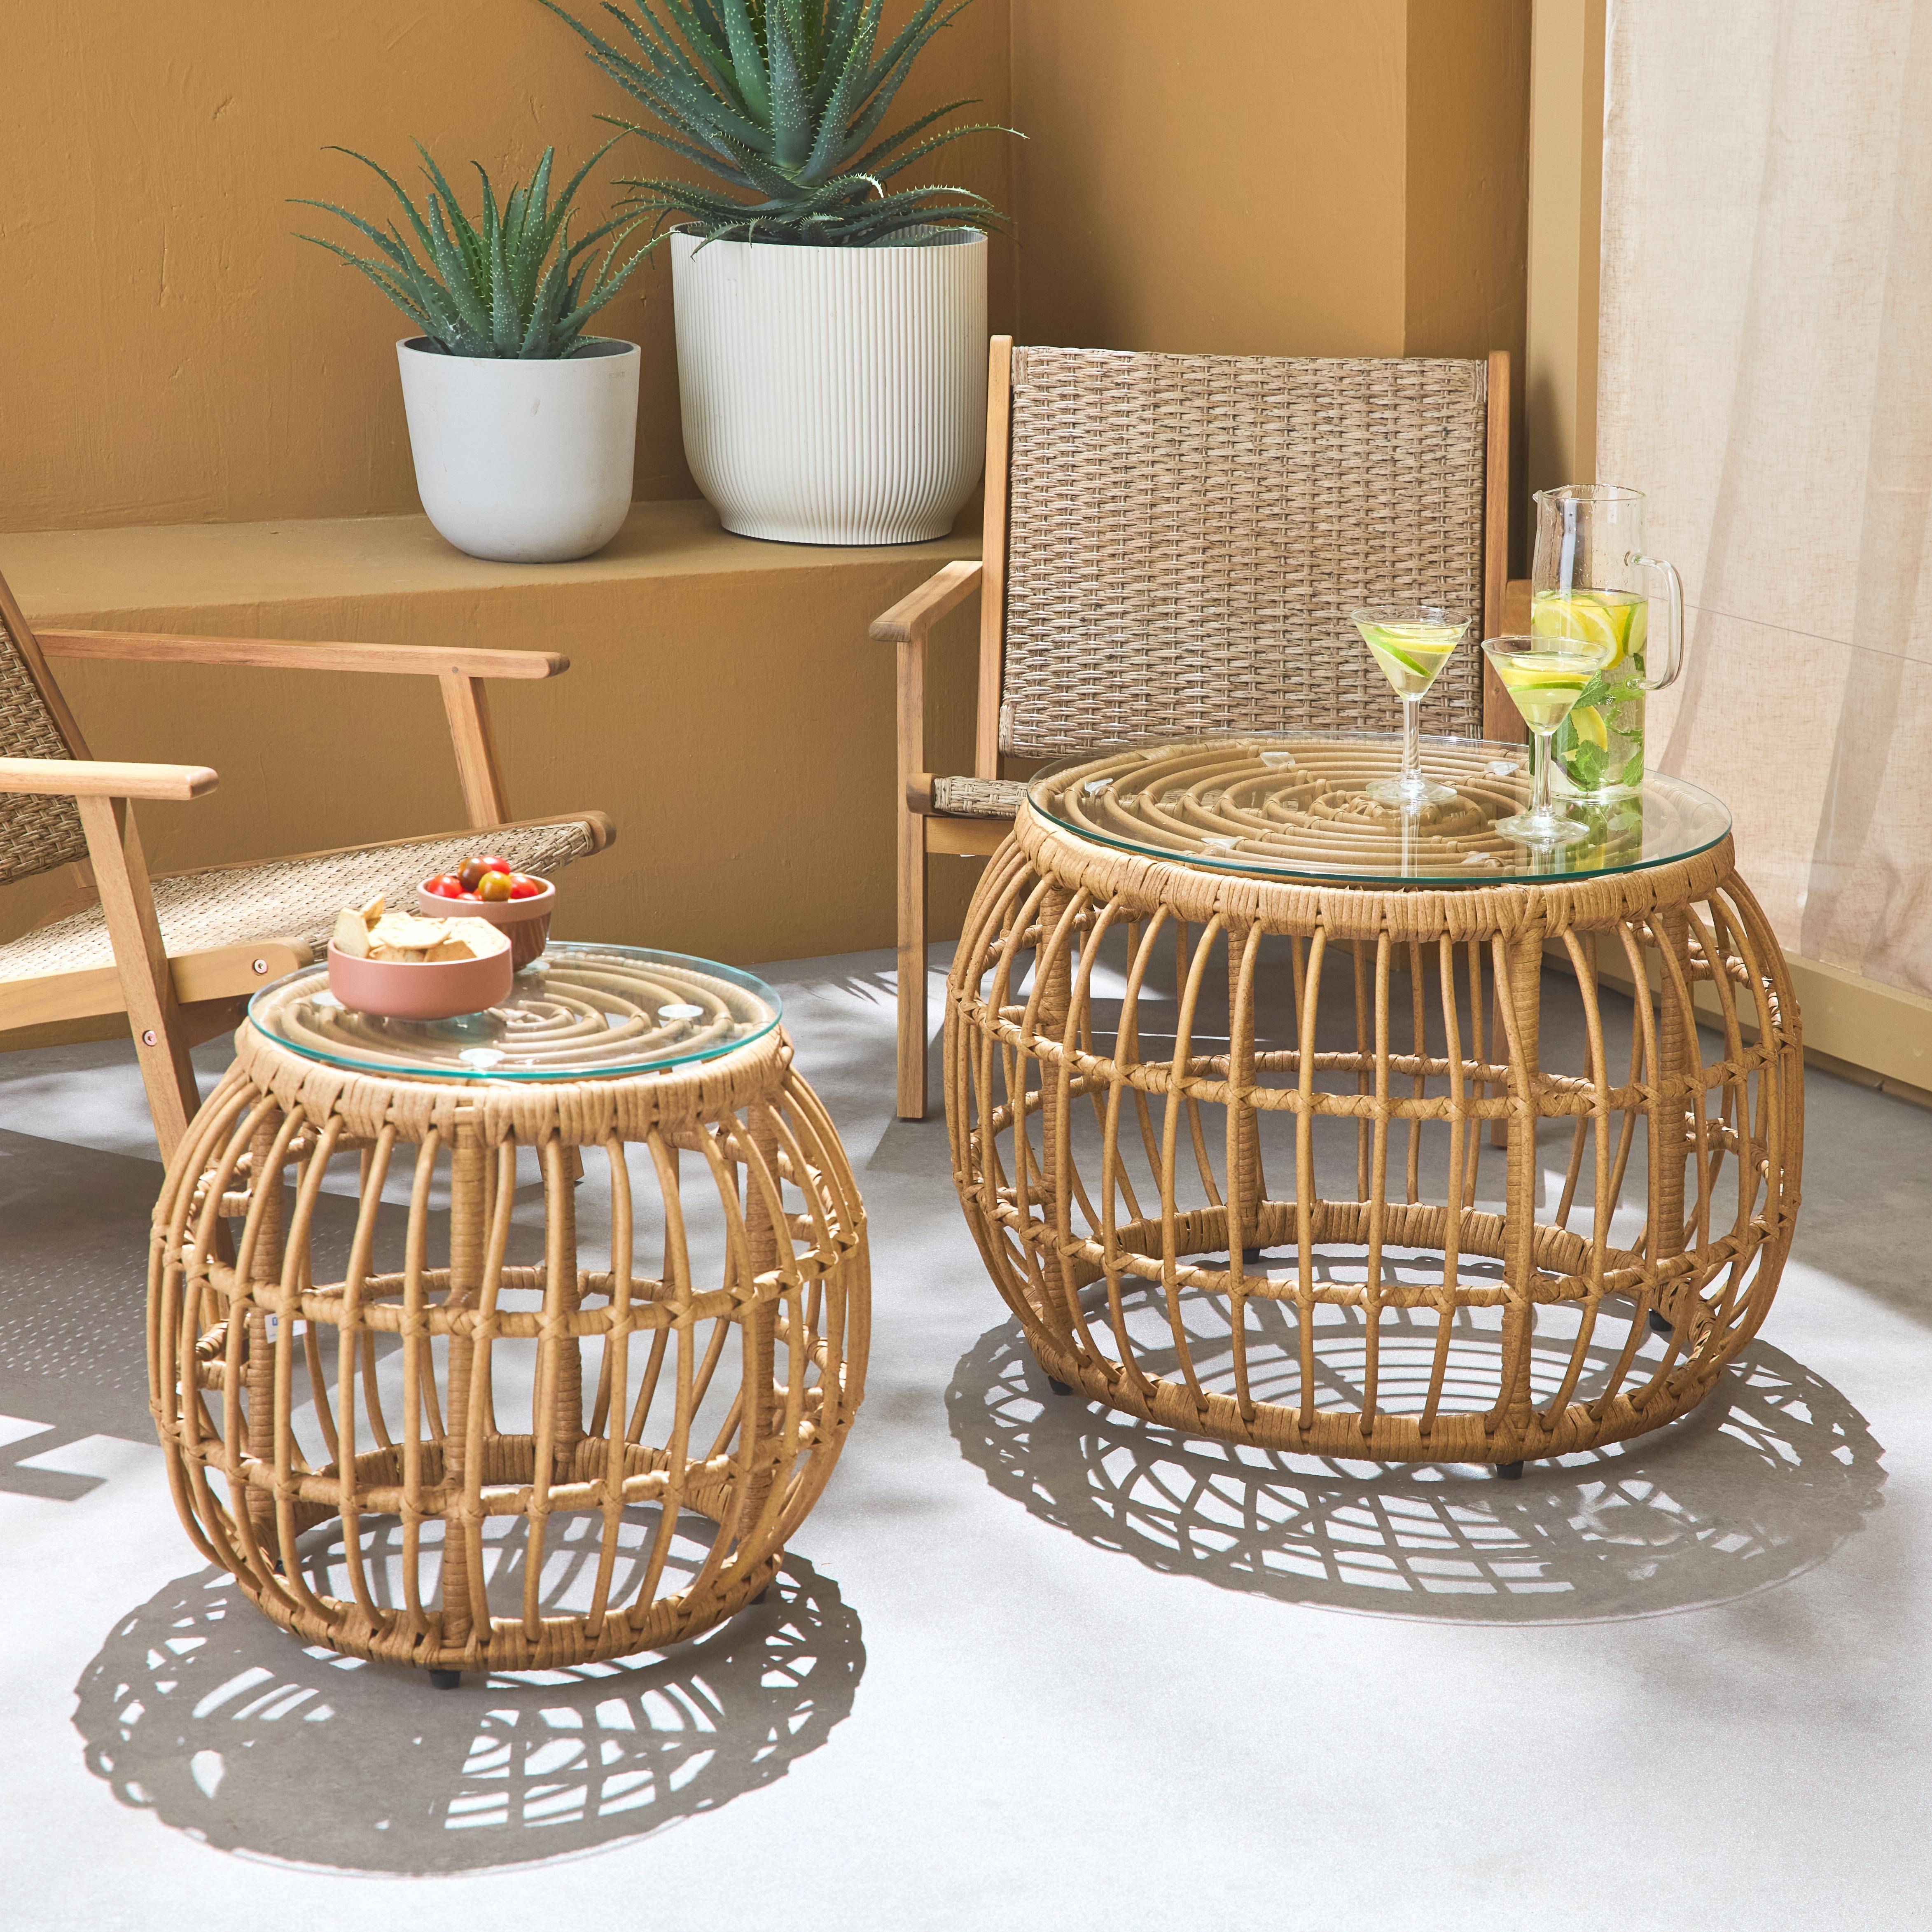 Set of 2 garden coffee tables, Aluminium & Water Resistant, natural Photo1